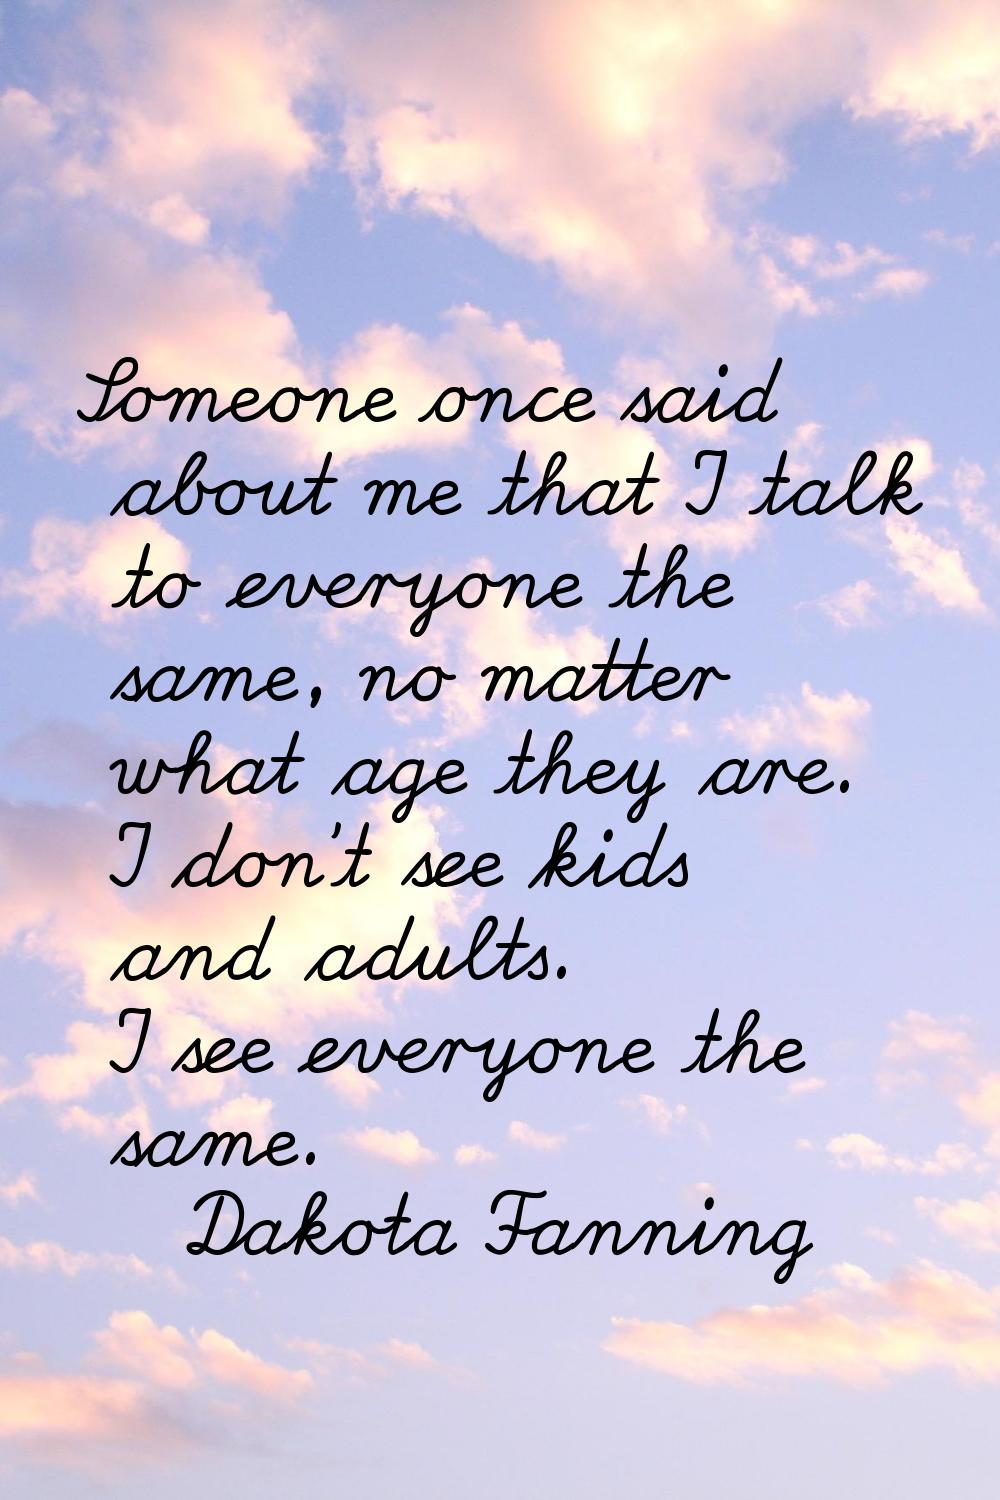 Someone once said about me that I talk to everyone the same, no matter what age they are. I don't s